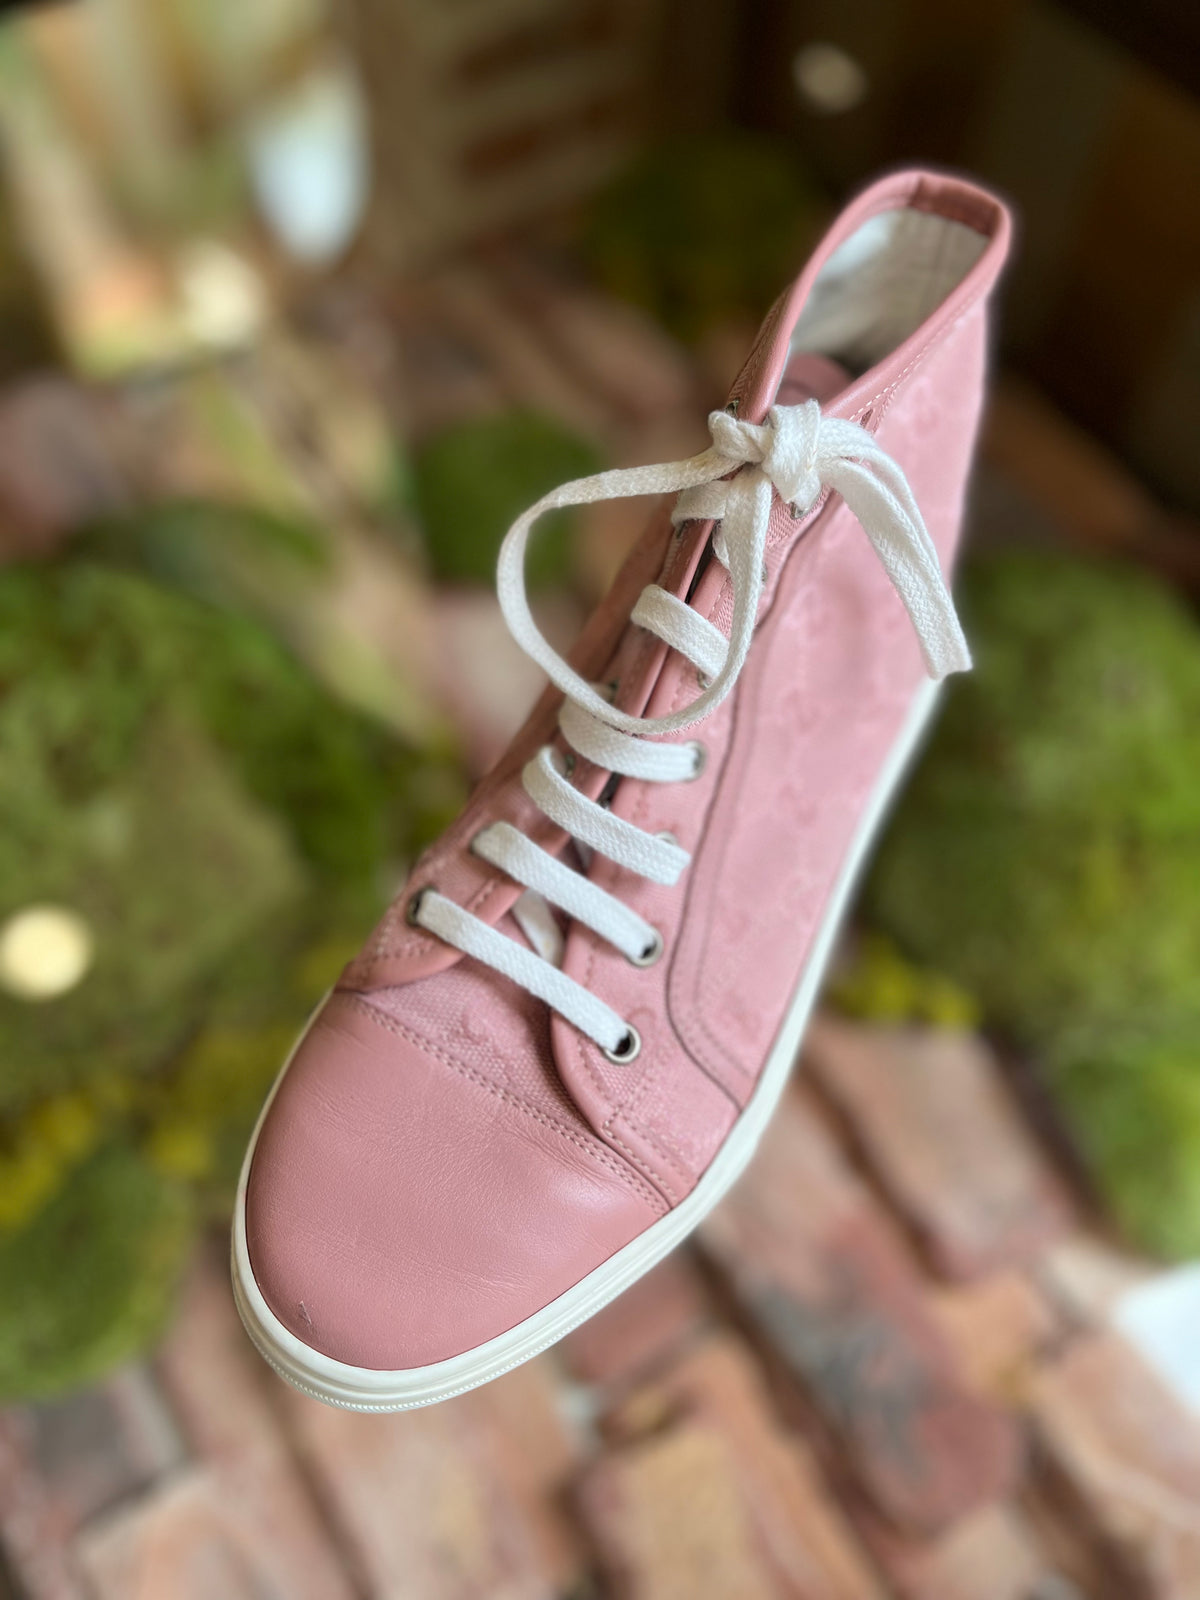 Gucci Pink GG Canvas High Top Sneakers SZ 37.5